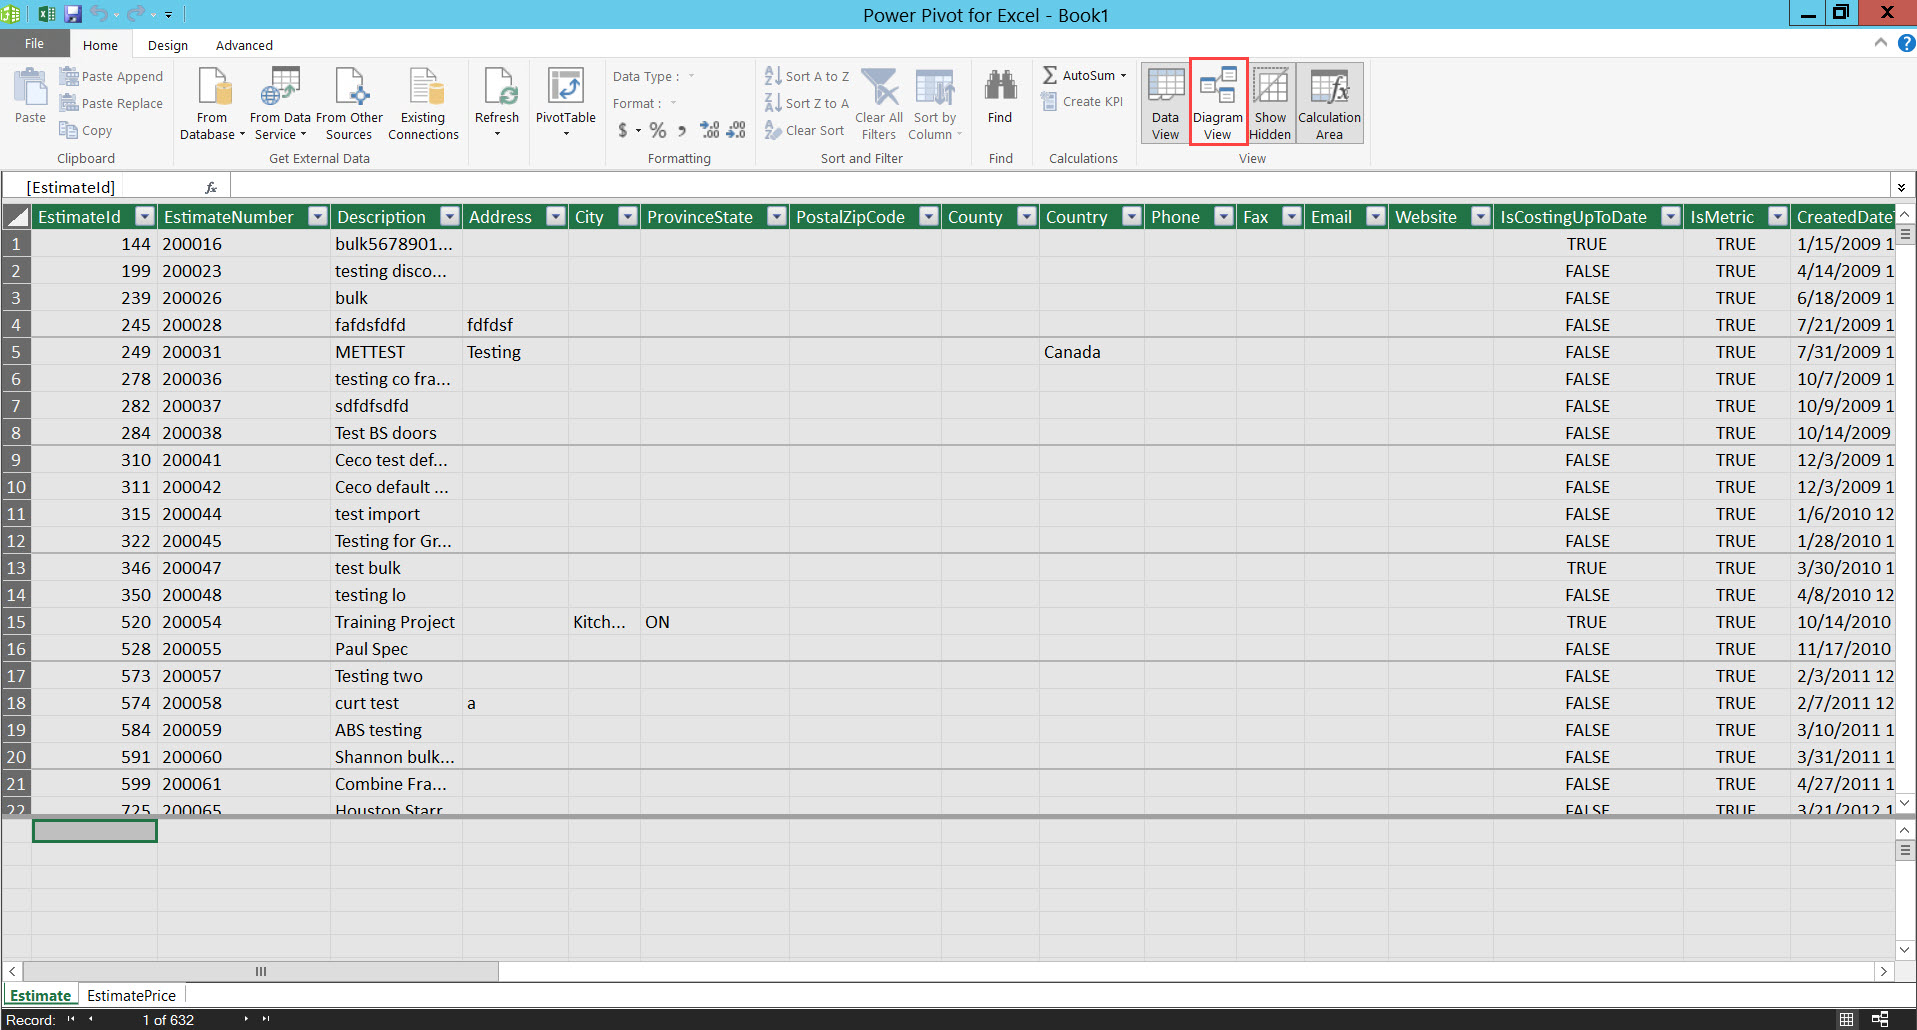 Power Pivot for Excel workbook; shows the location of Diagram View.